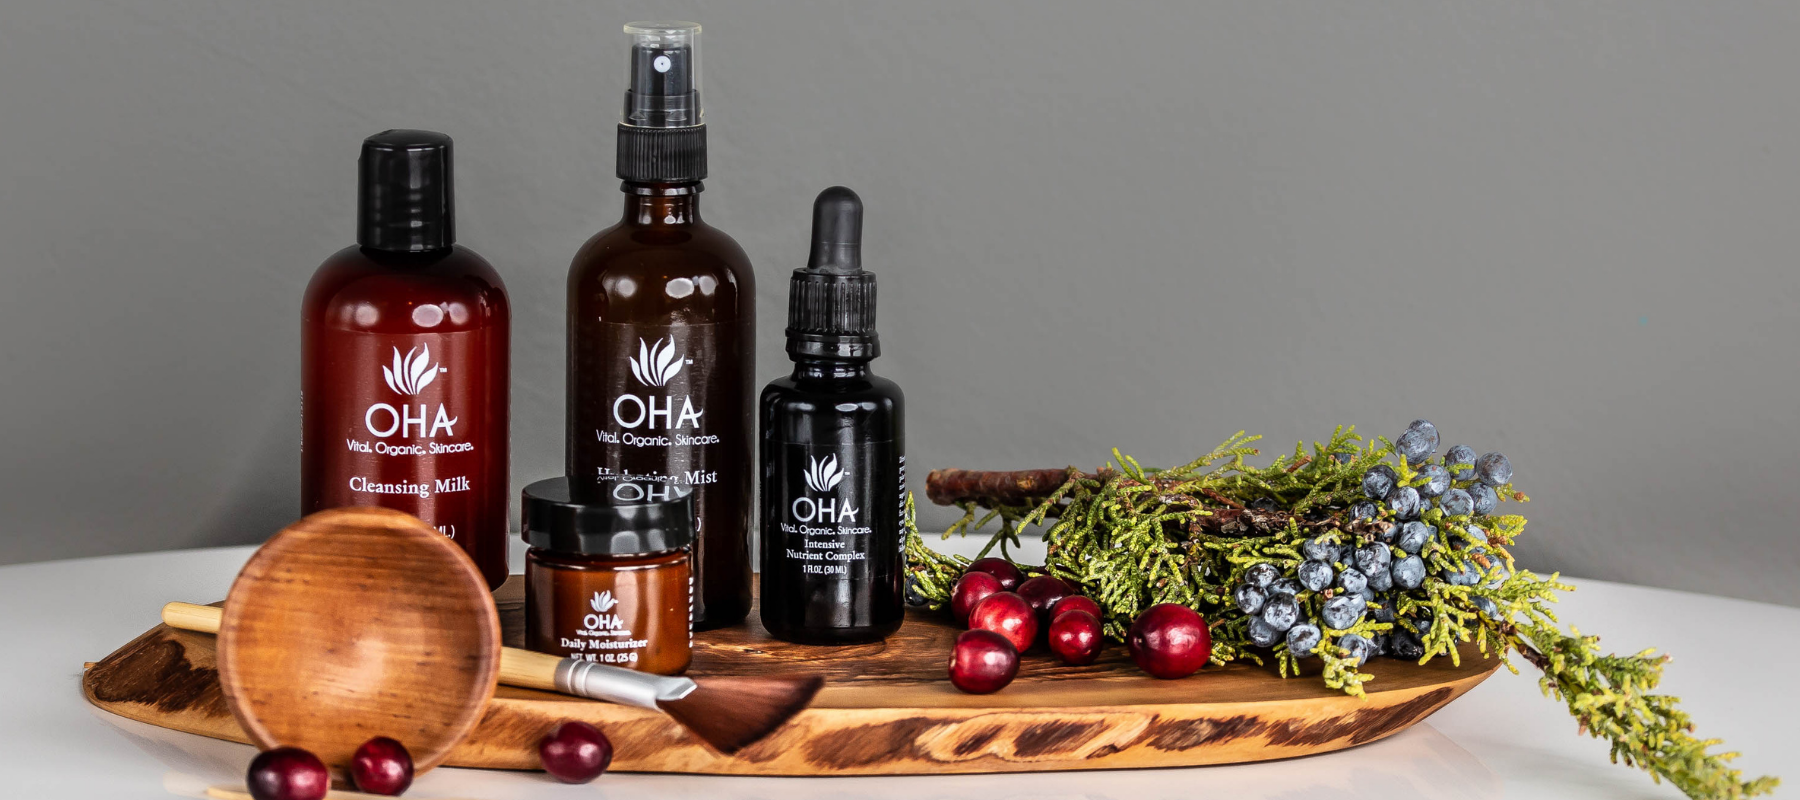 all-natural skincare products sitting on wooden board with festive sprigs